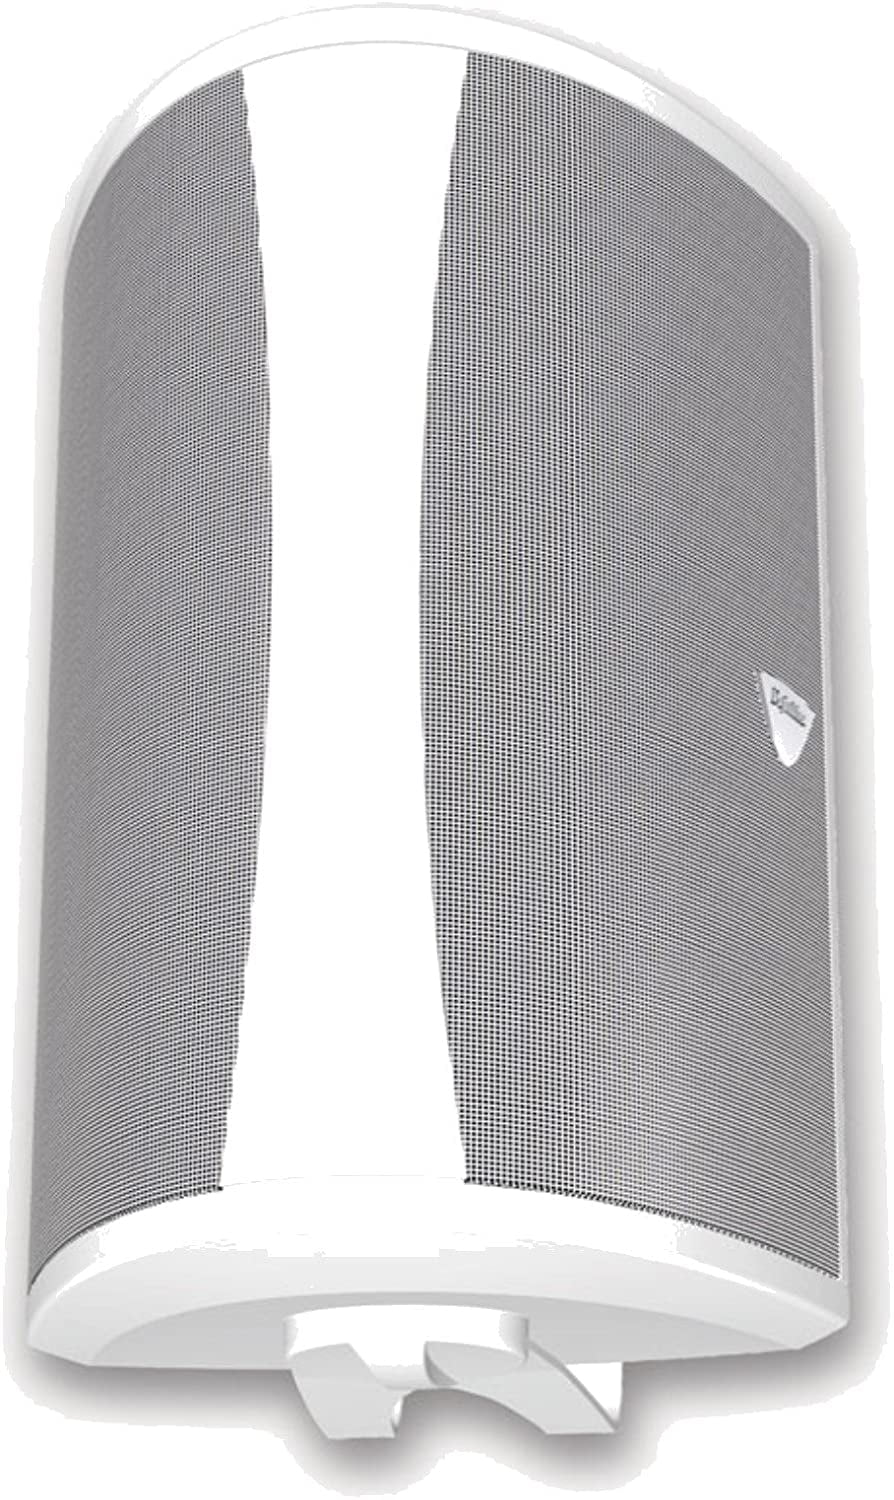 Photo 1 of ***PARTS ONLY*** Definitive Technology AW6500 Outdoor 2-Way Speaker - White